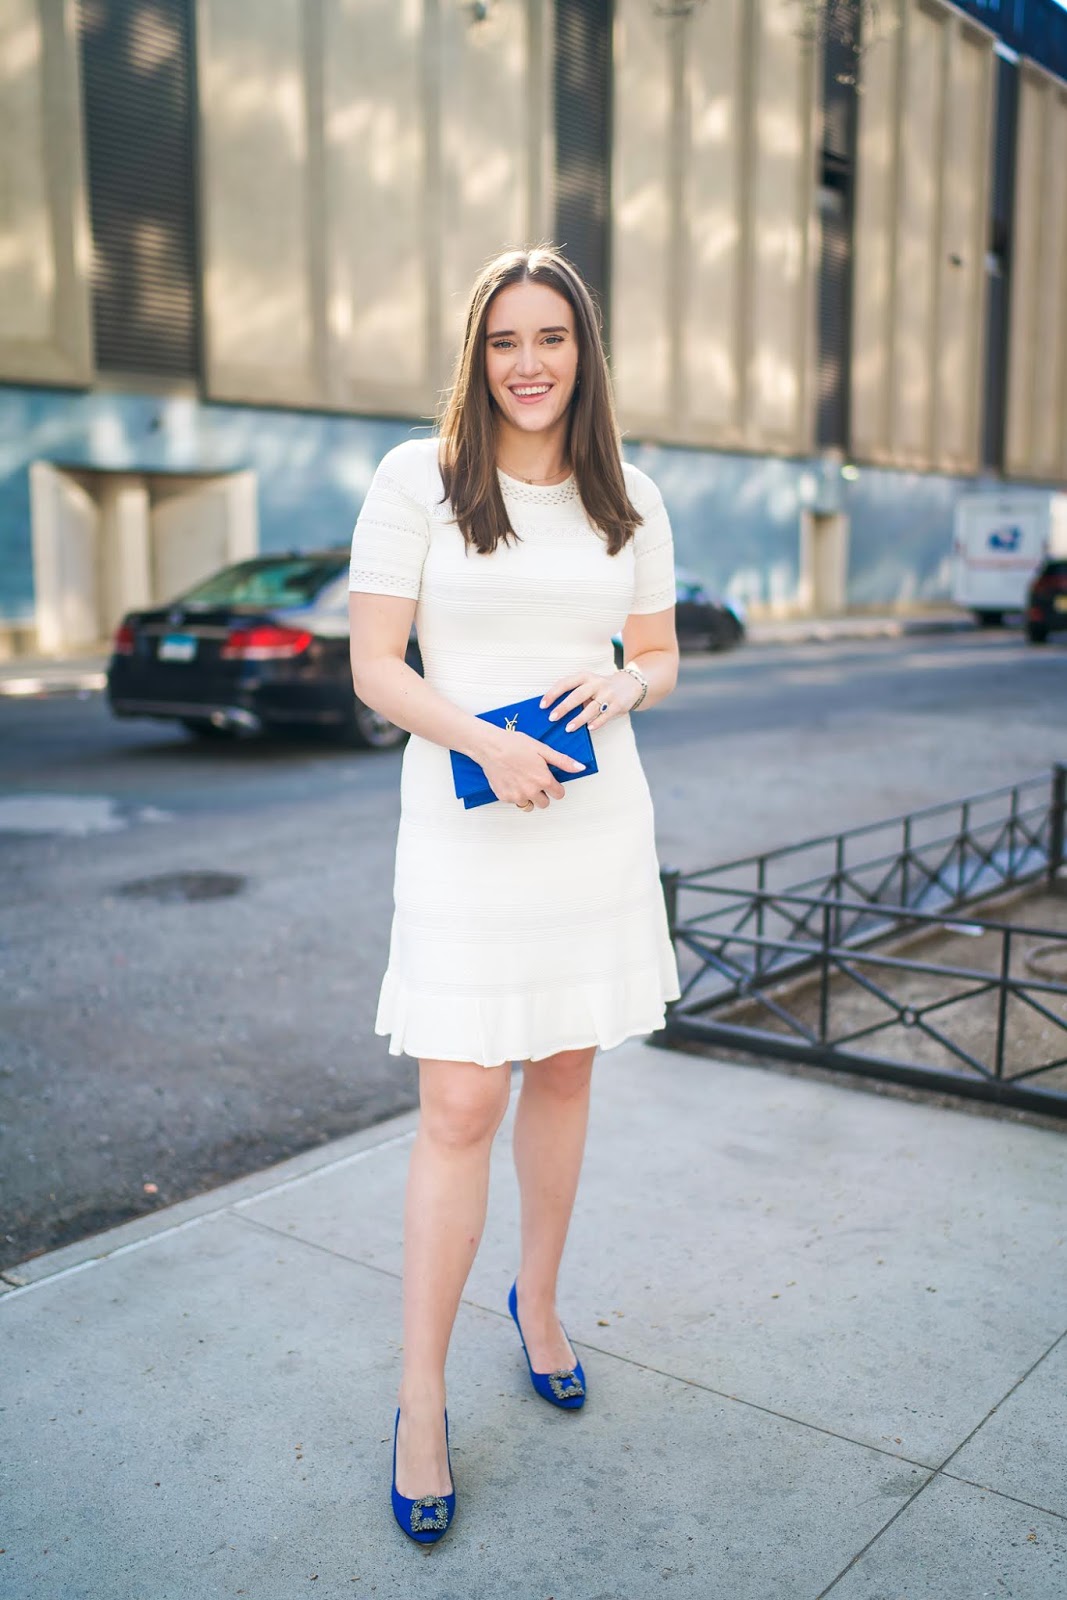 Blue Shoes With a White Dress